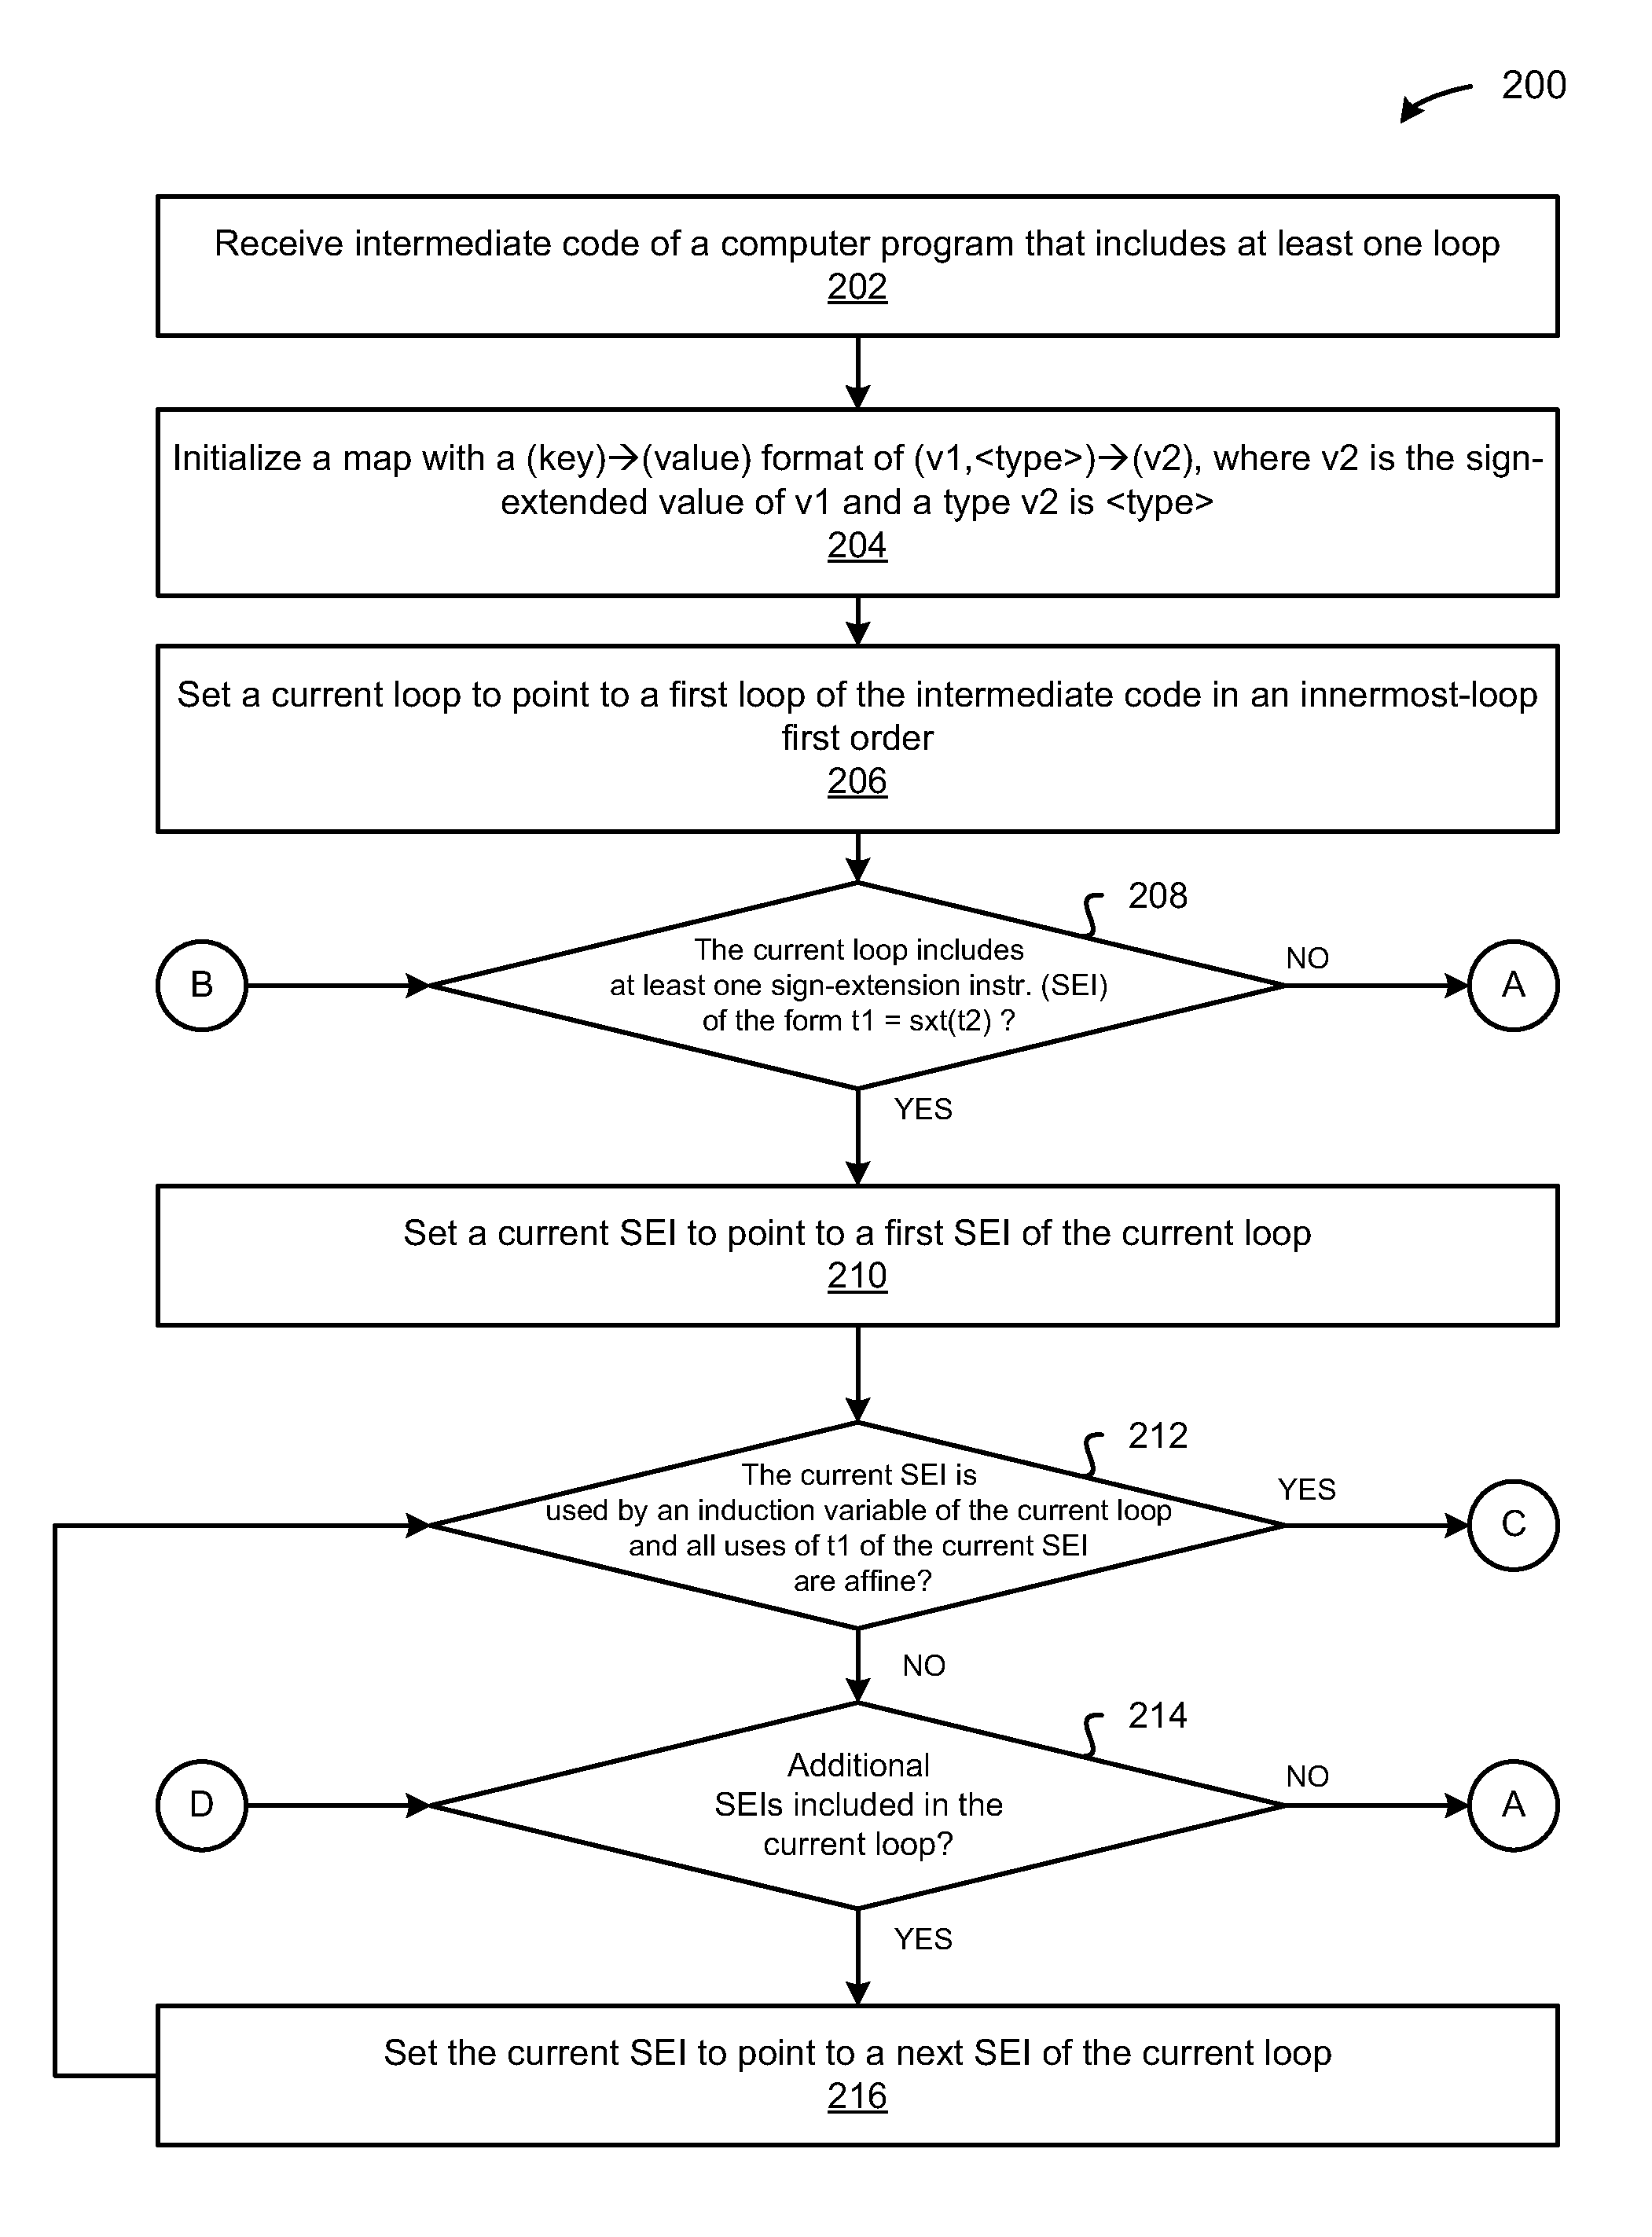 Demand-driven algorithm to reduce sign-extension instructions included in loops of a 64-bit computer program